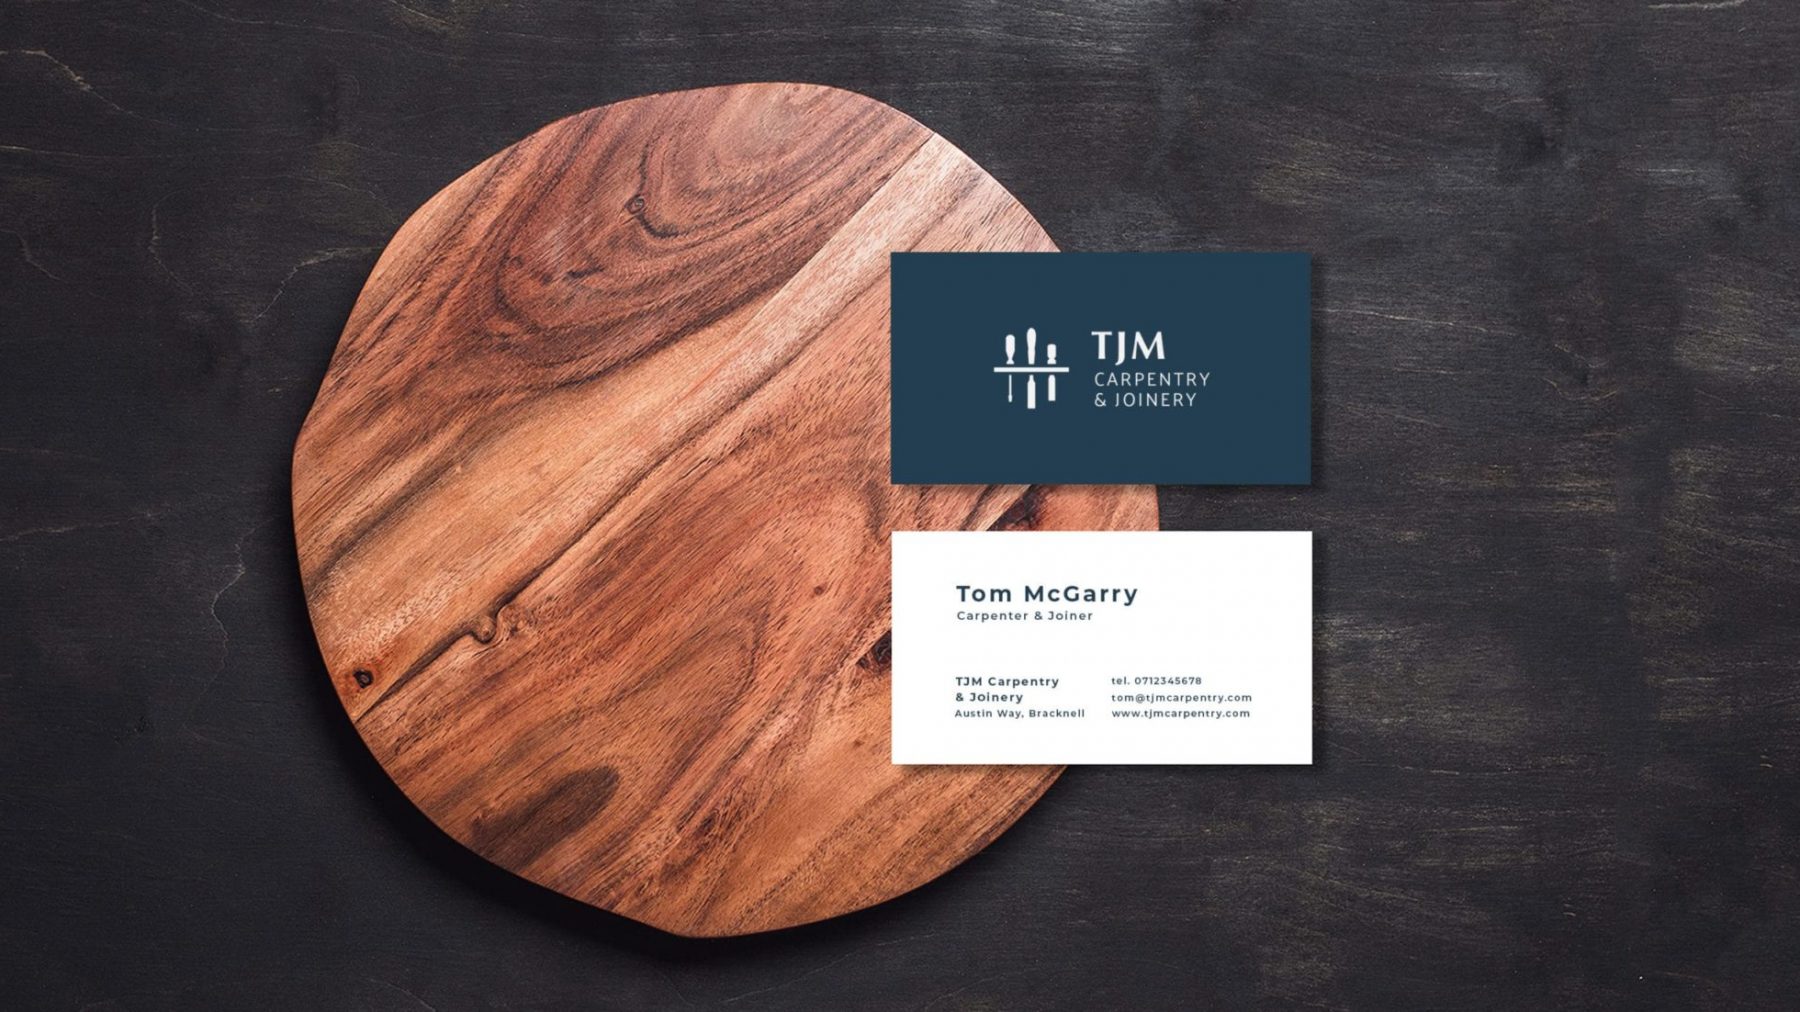 TJM Carpentry & Joinery Business Card